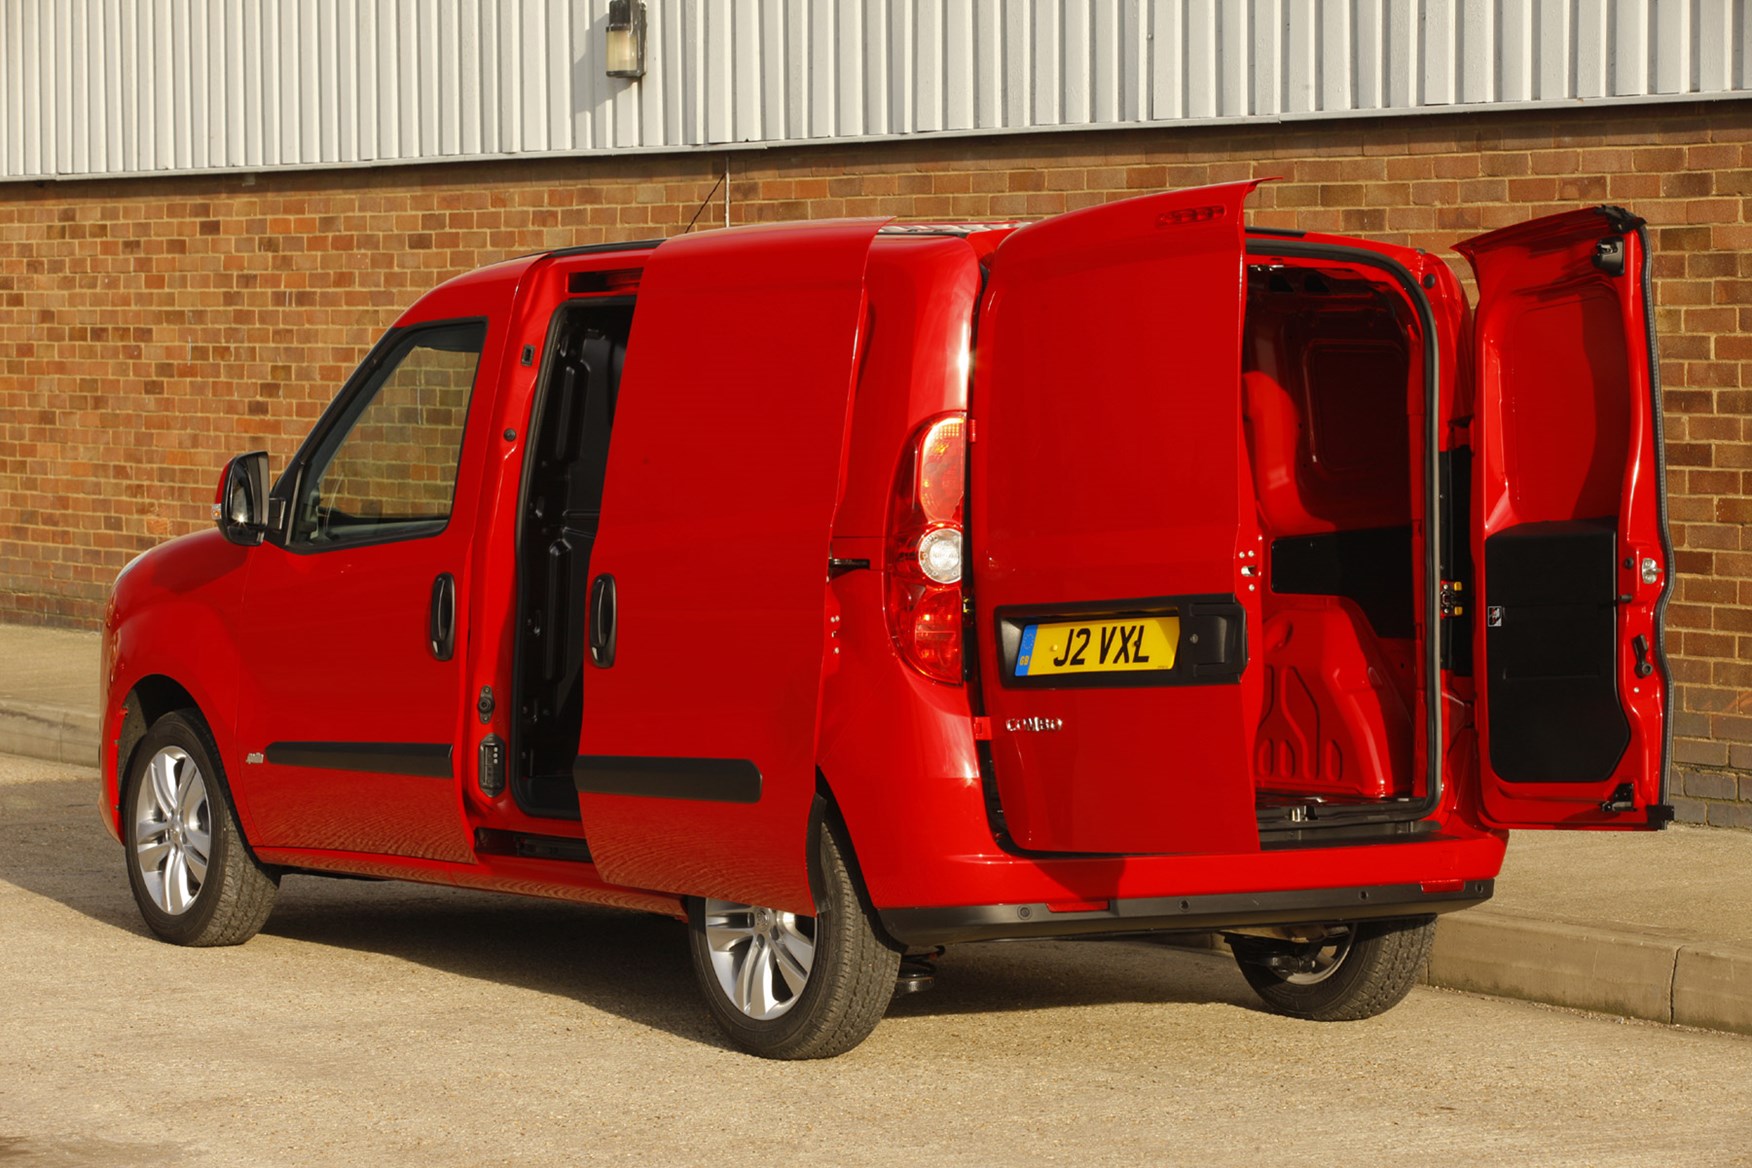 Vauxhall Combo full review on Parkers Vans - load area access